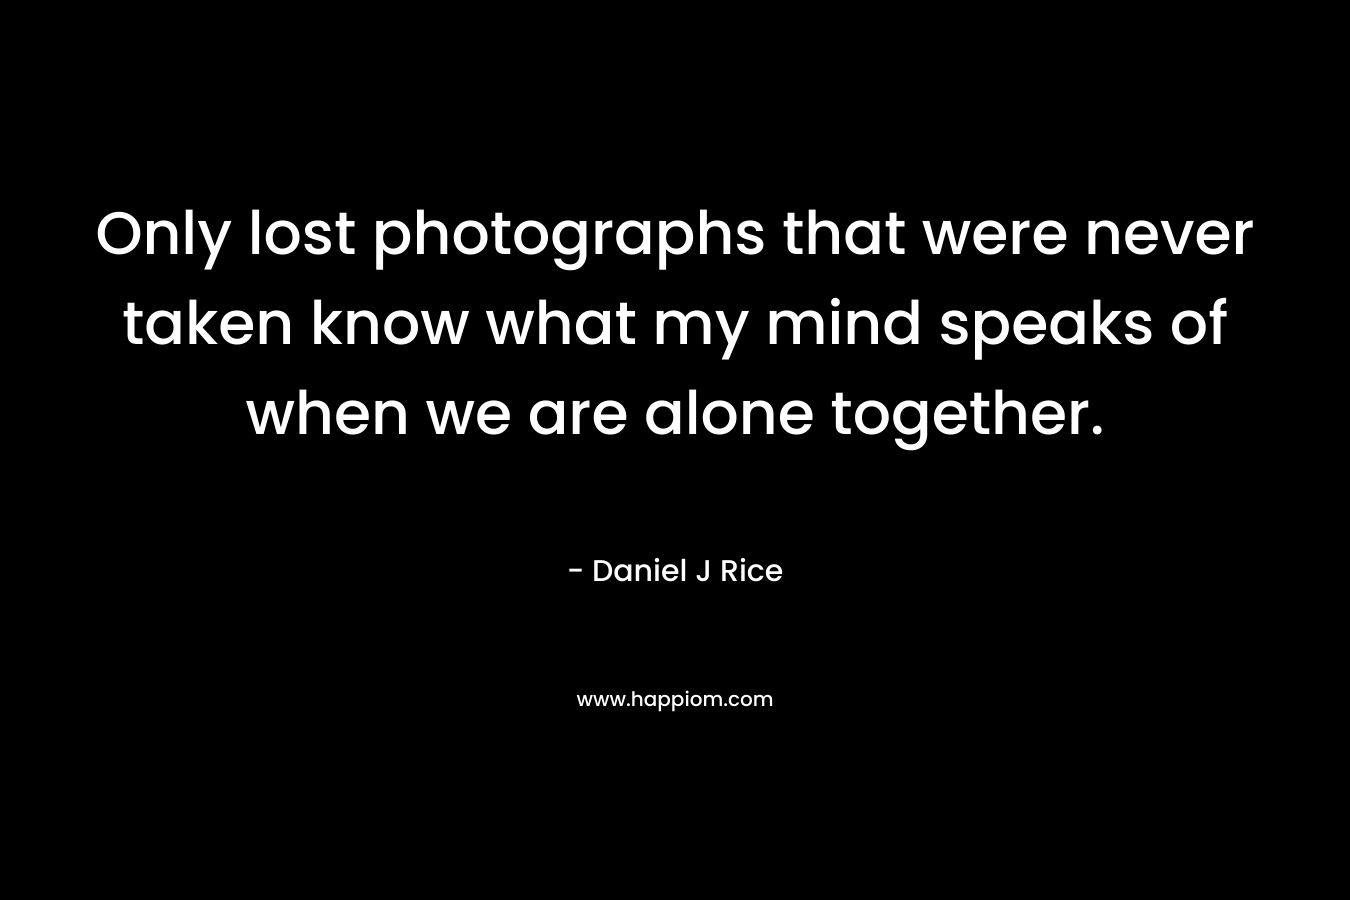 Only lost photographs that were never taken know what my mind speaks of when we are alone together. – Daniel J Rice